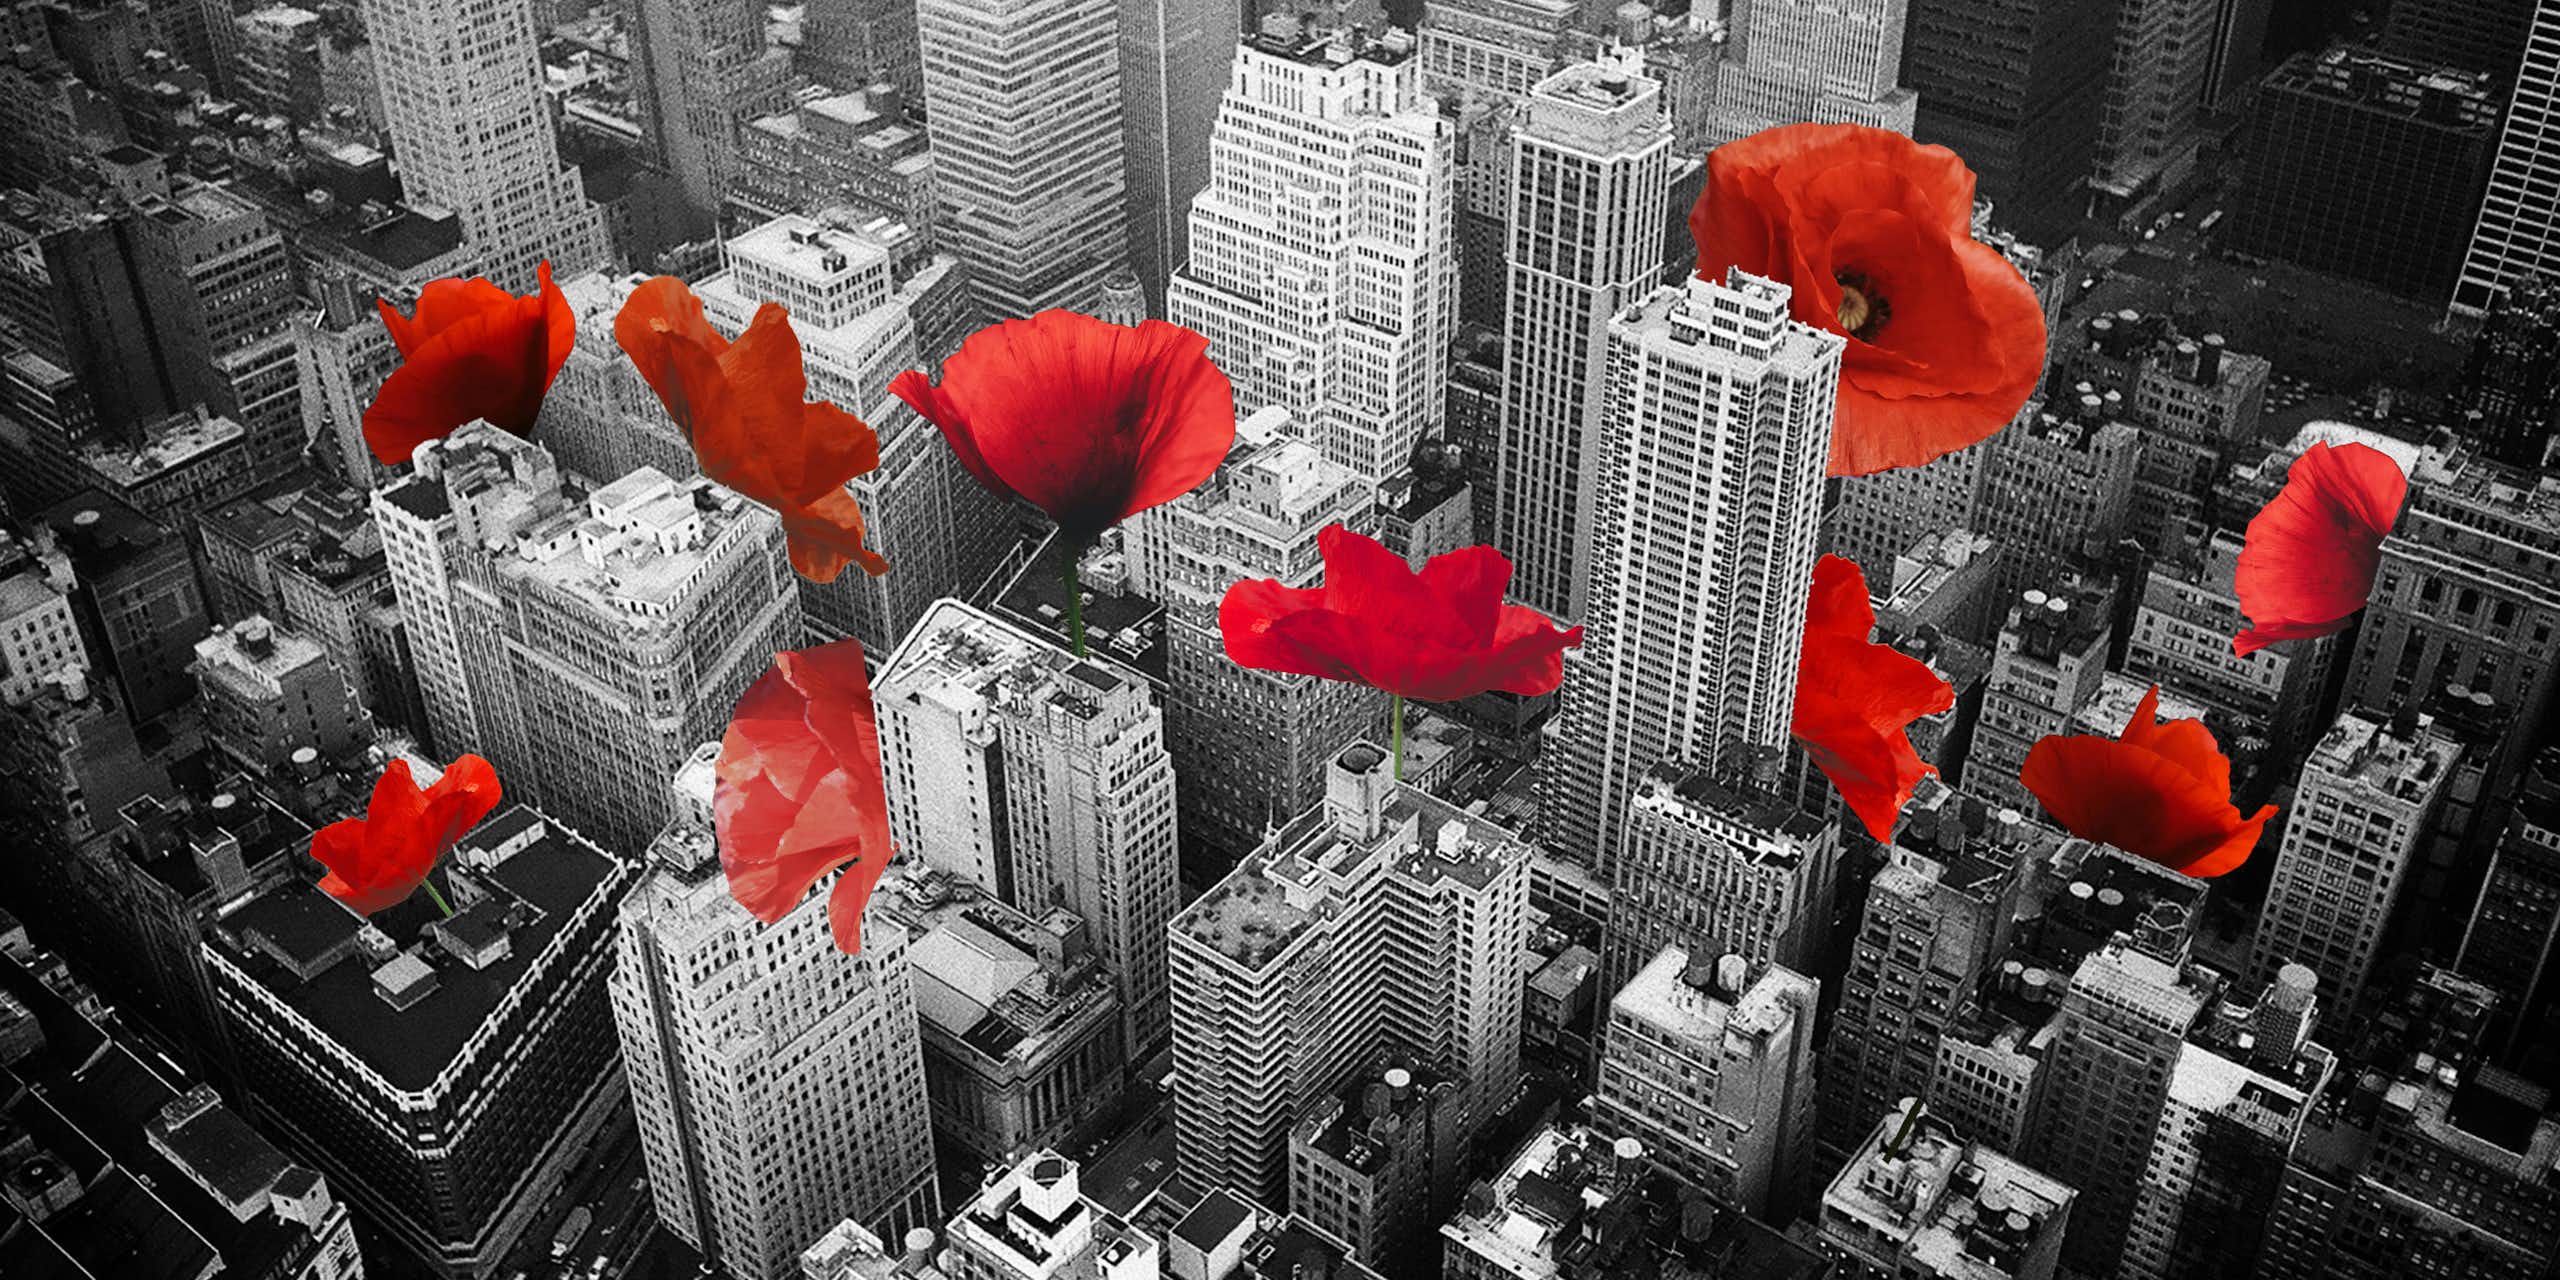 Composite image of an aerial shot of New York city with poppies growing out of the buildings